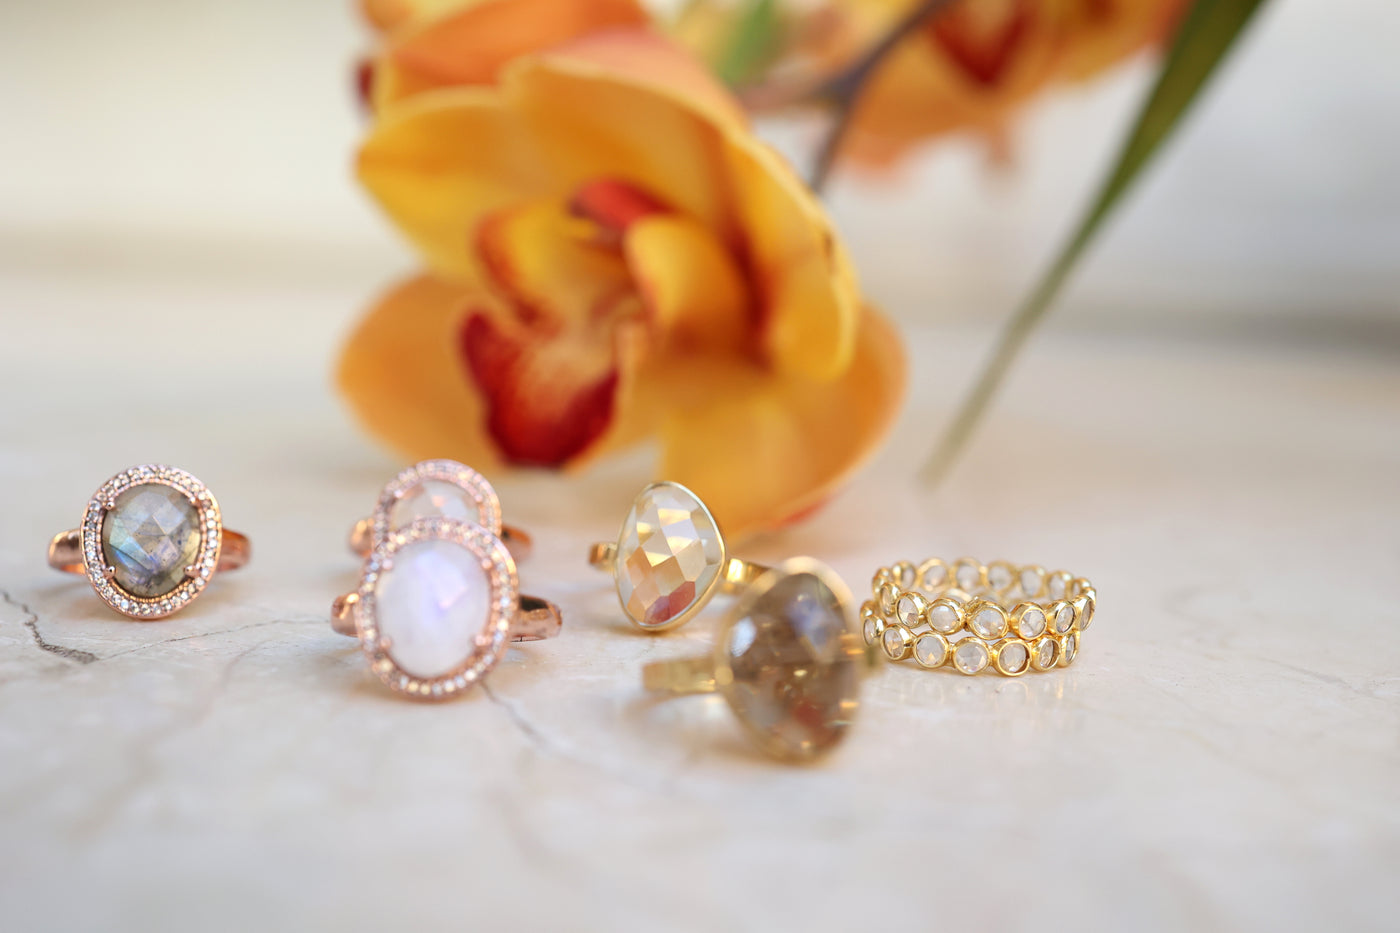 Sterling Silver and 14 carat gold plated gemstone rings photographed on marble setting